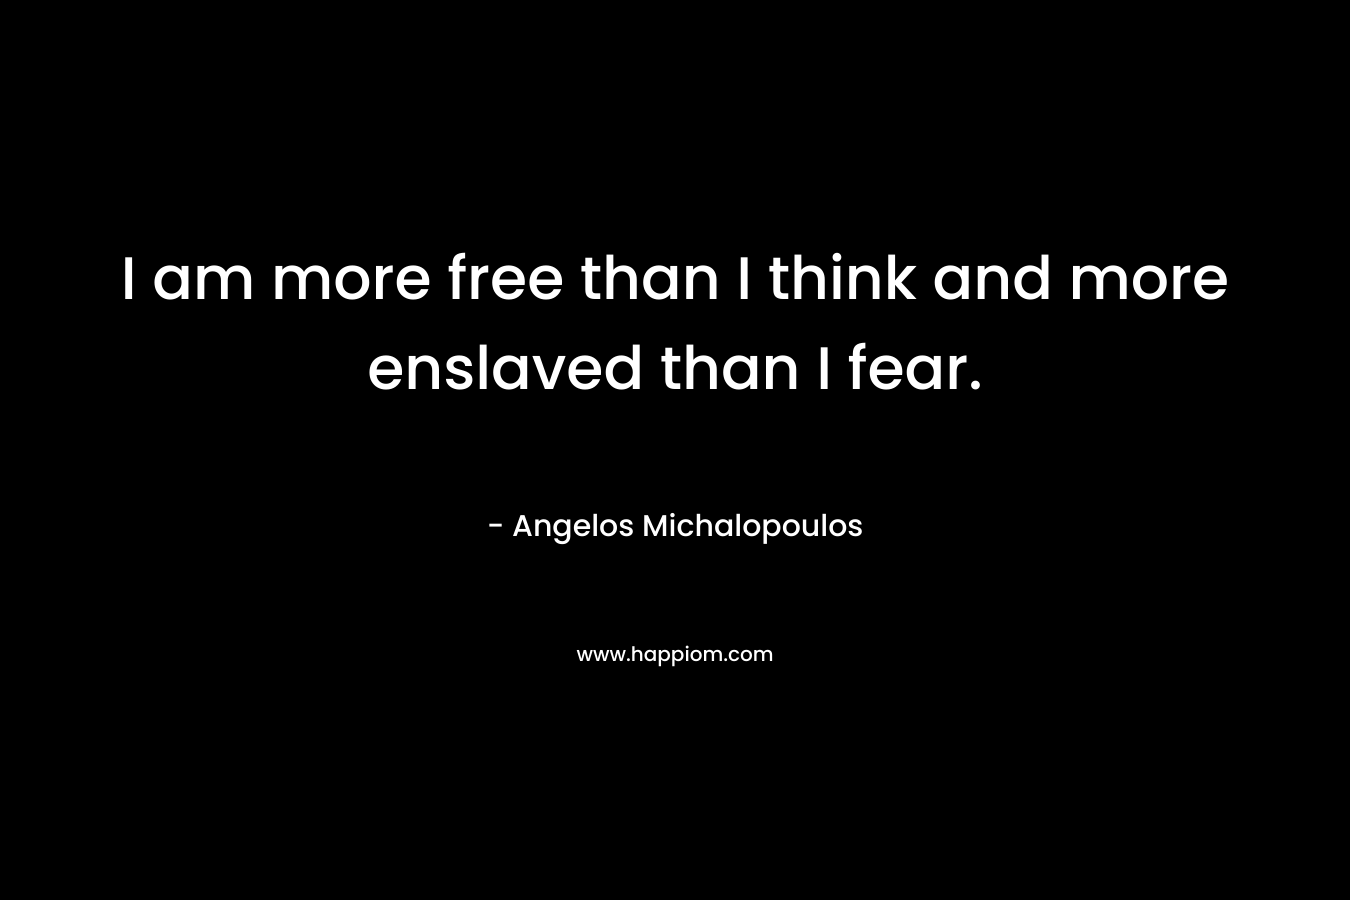 I am more free than I think and more enslaved than I fear.